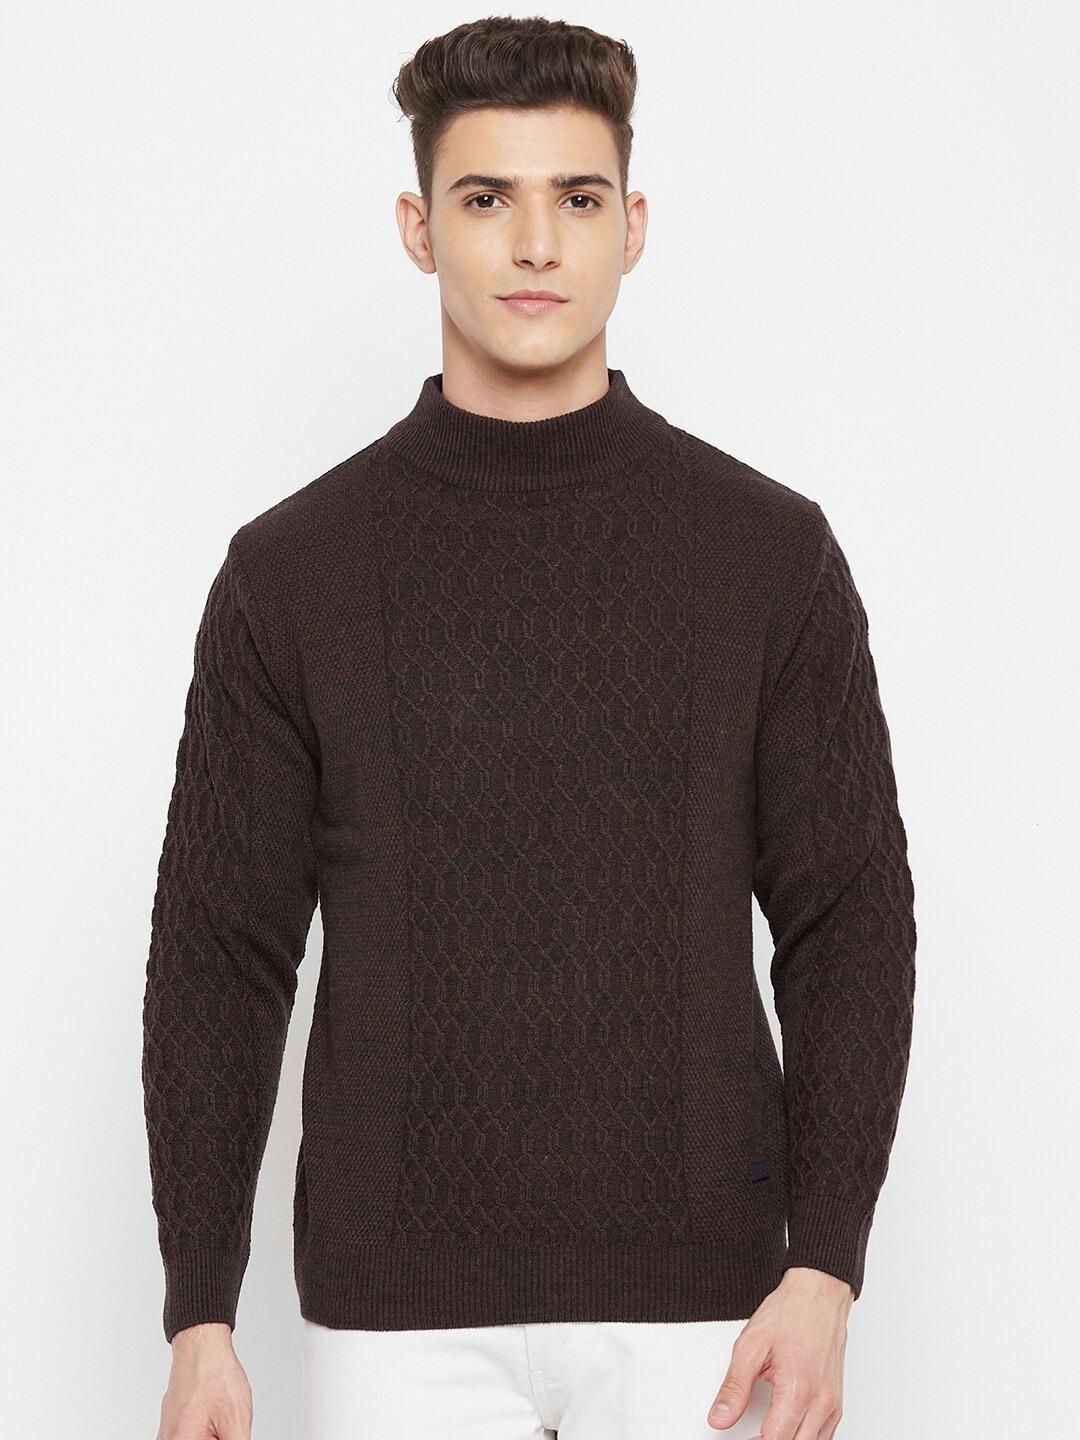 duke-men-brown-cable-knit-pullover